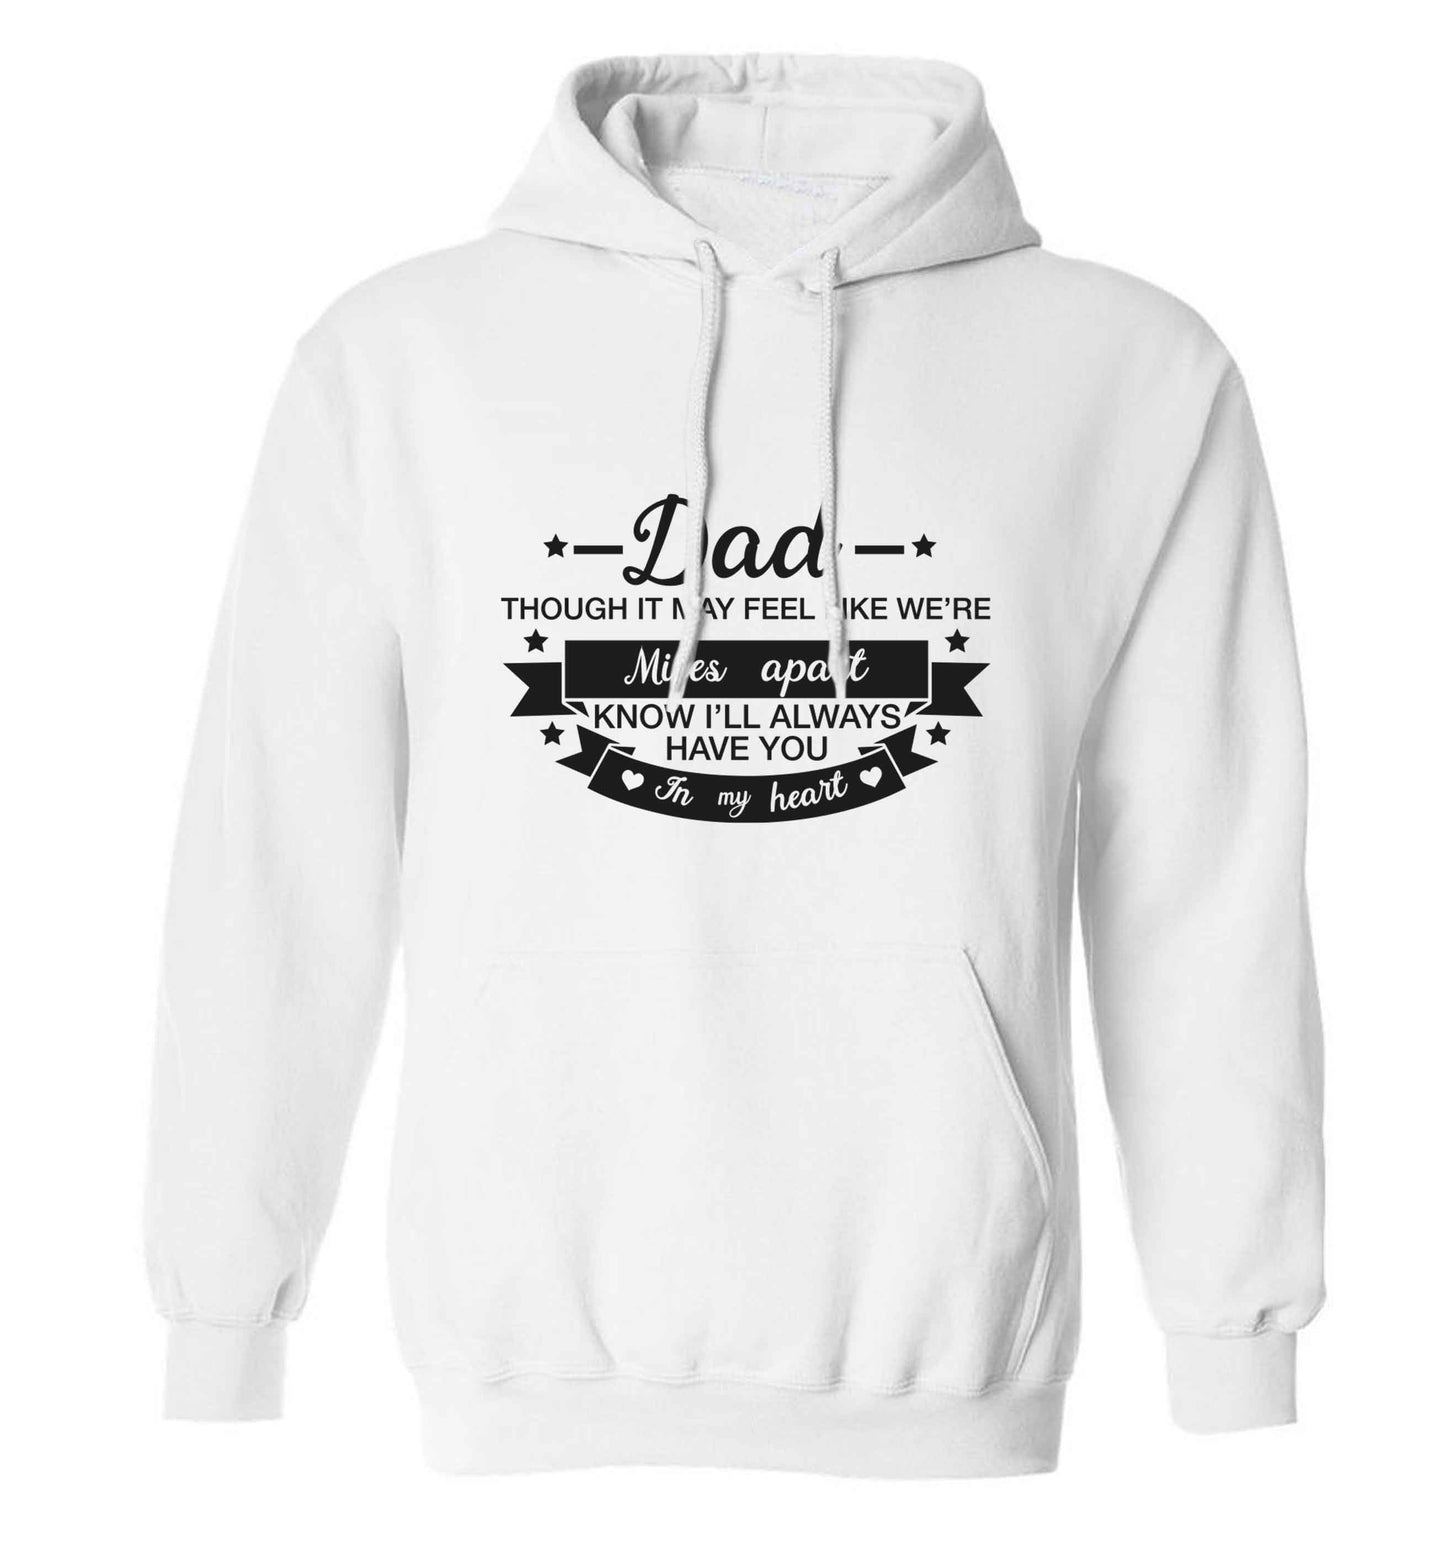 Dad though it may feel like we're miles apart know I'll always have you in my heart adults unisex white hoodie 2XL